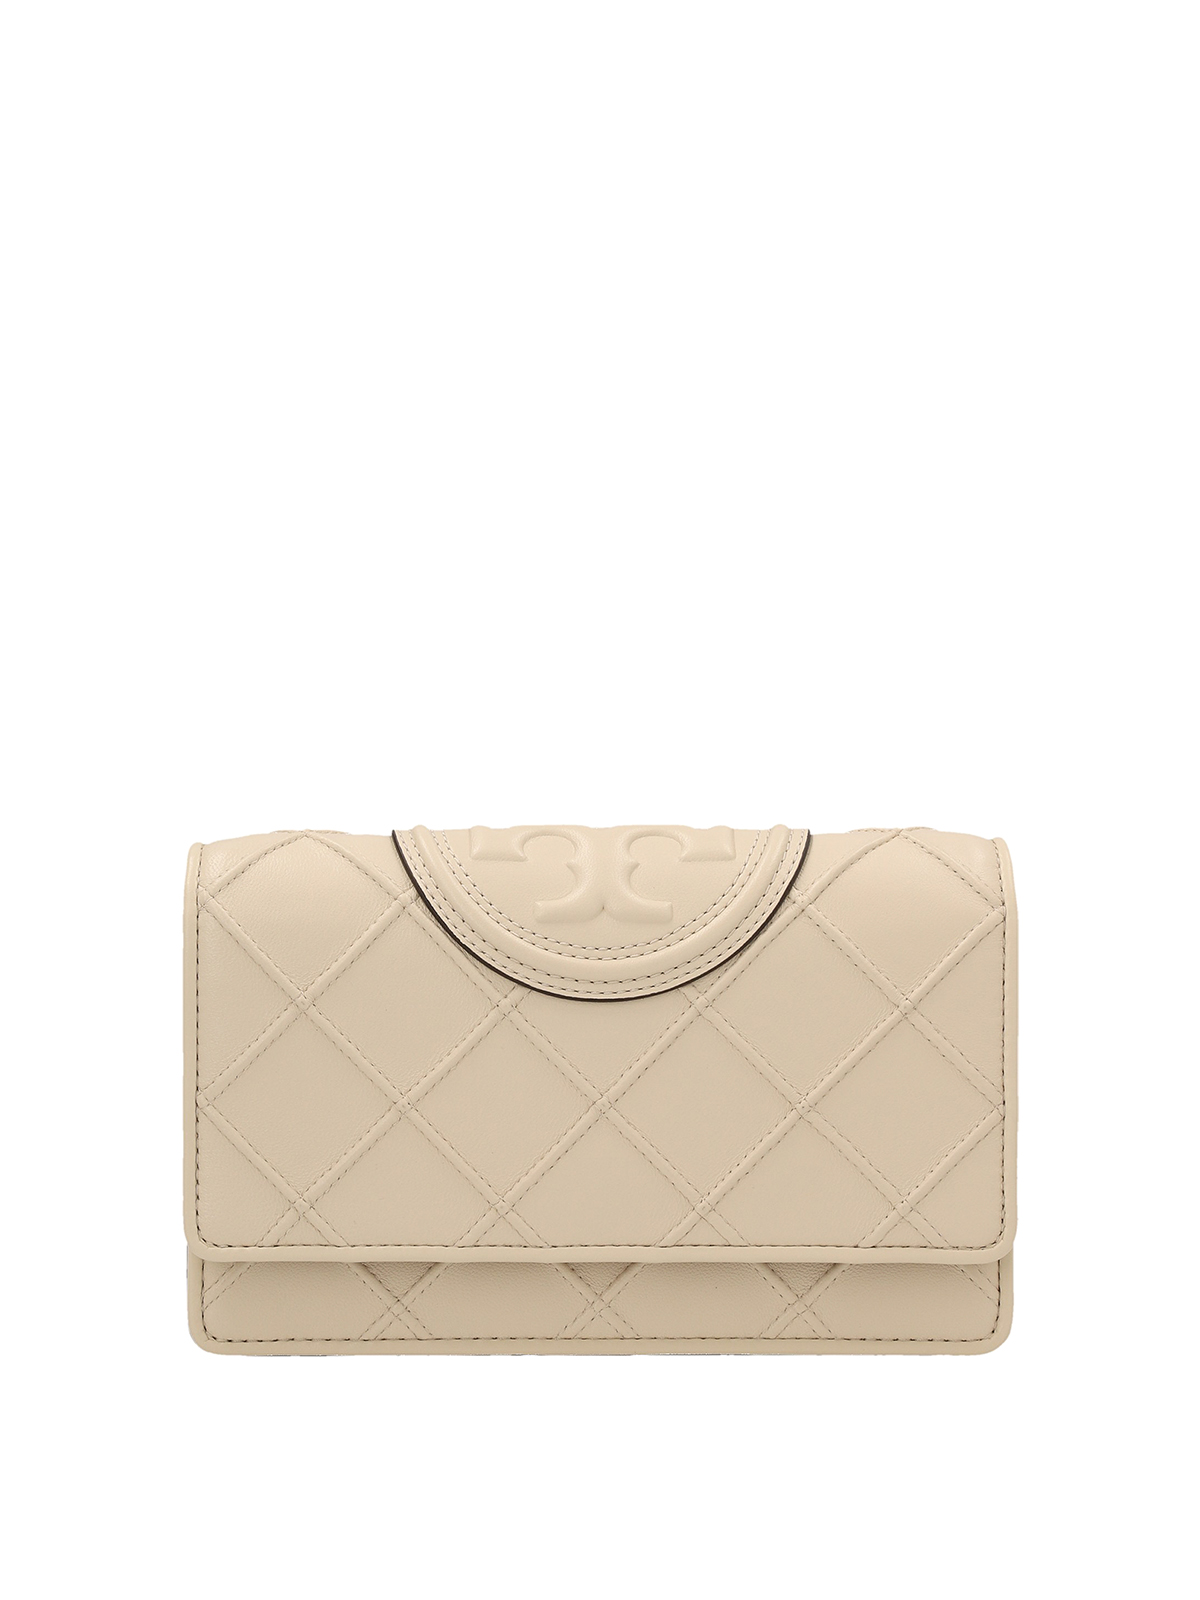 Tory Burch Fleming Wallet In White